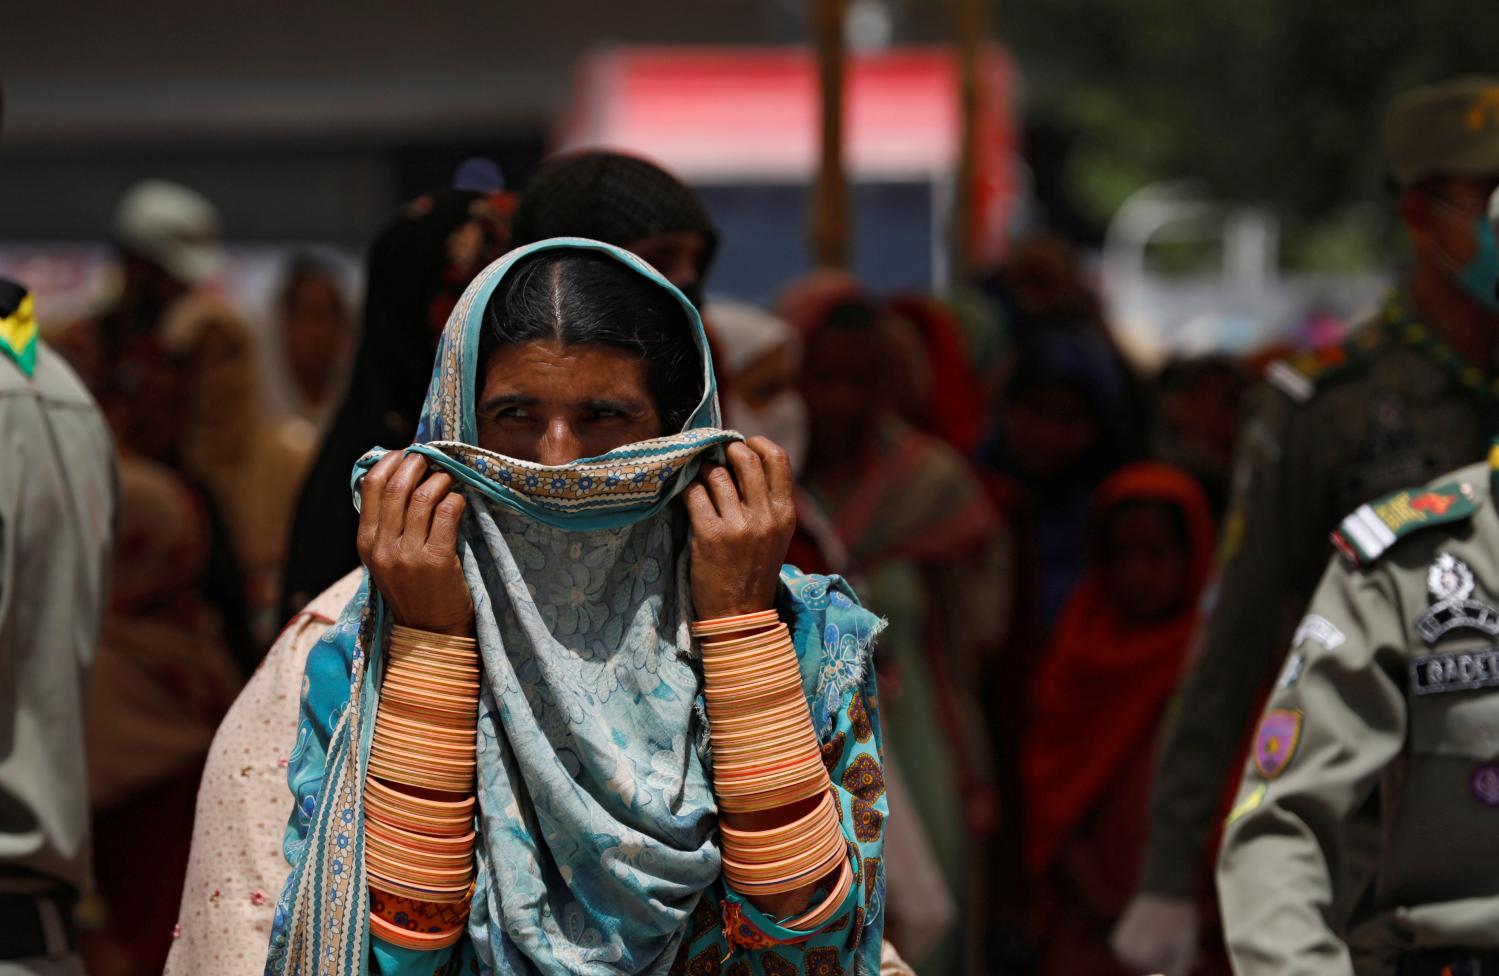 A woman covers her nose and mouth with ? scarf, as she along with others waits to receive cash from a country-wide Ehsaas Emergency Cash program, introduced by the government for vulnerable families due to the ongoing spread of coronavirus disease (COVID-19), in Karachi, Pakistan April 11, 2020. REUTERS/Akhtar Soomro